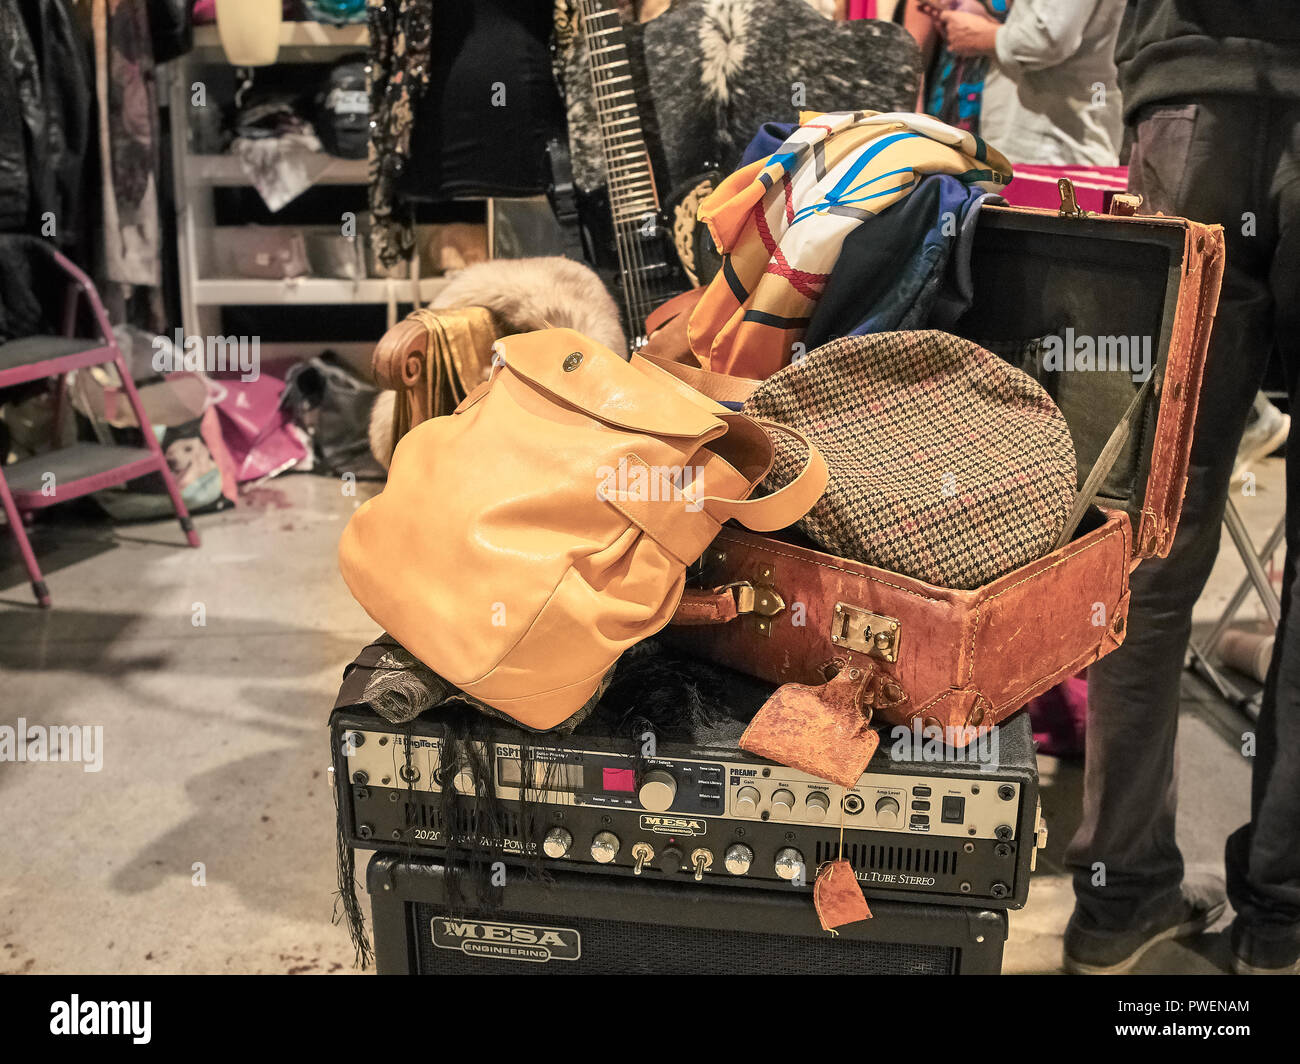 Milan, Italy - October 14, 2018: Shot of a vintage luggage on an amplifier. The East Market is a vintage indoor market led once per month in Milan. Stock Photo